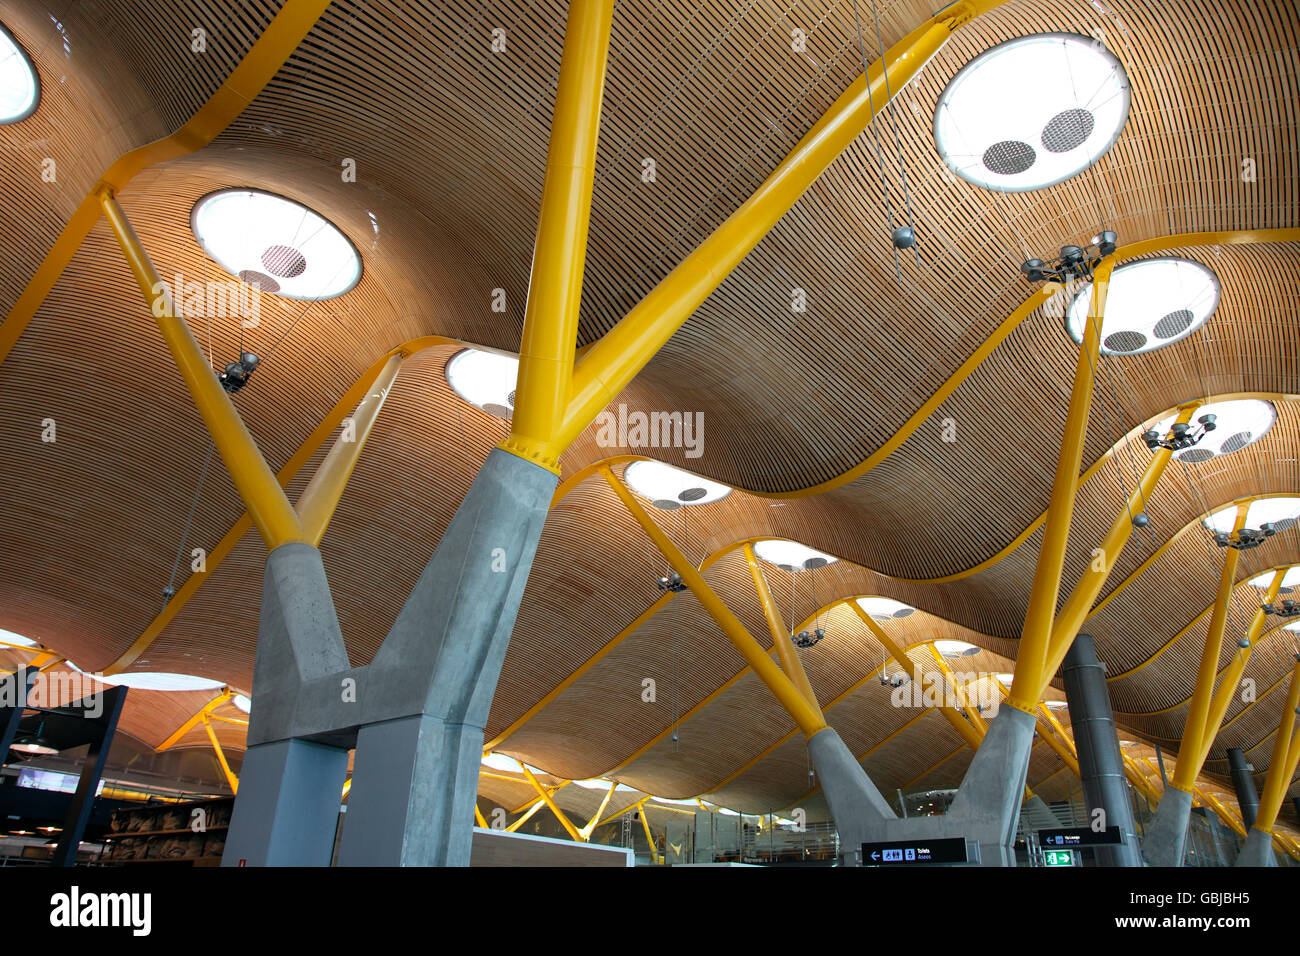 Roof of Terminal 4, Barajas Airport by Ricjard Rogers Stock Photo